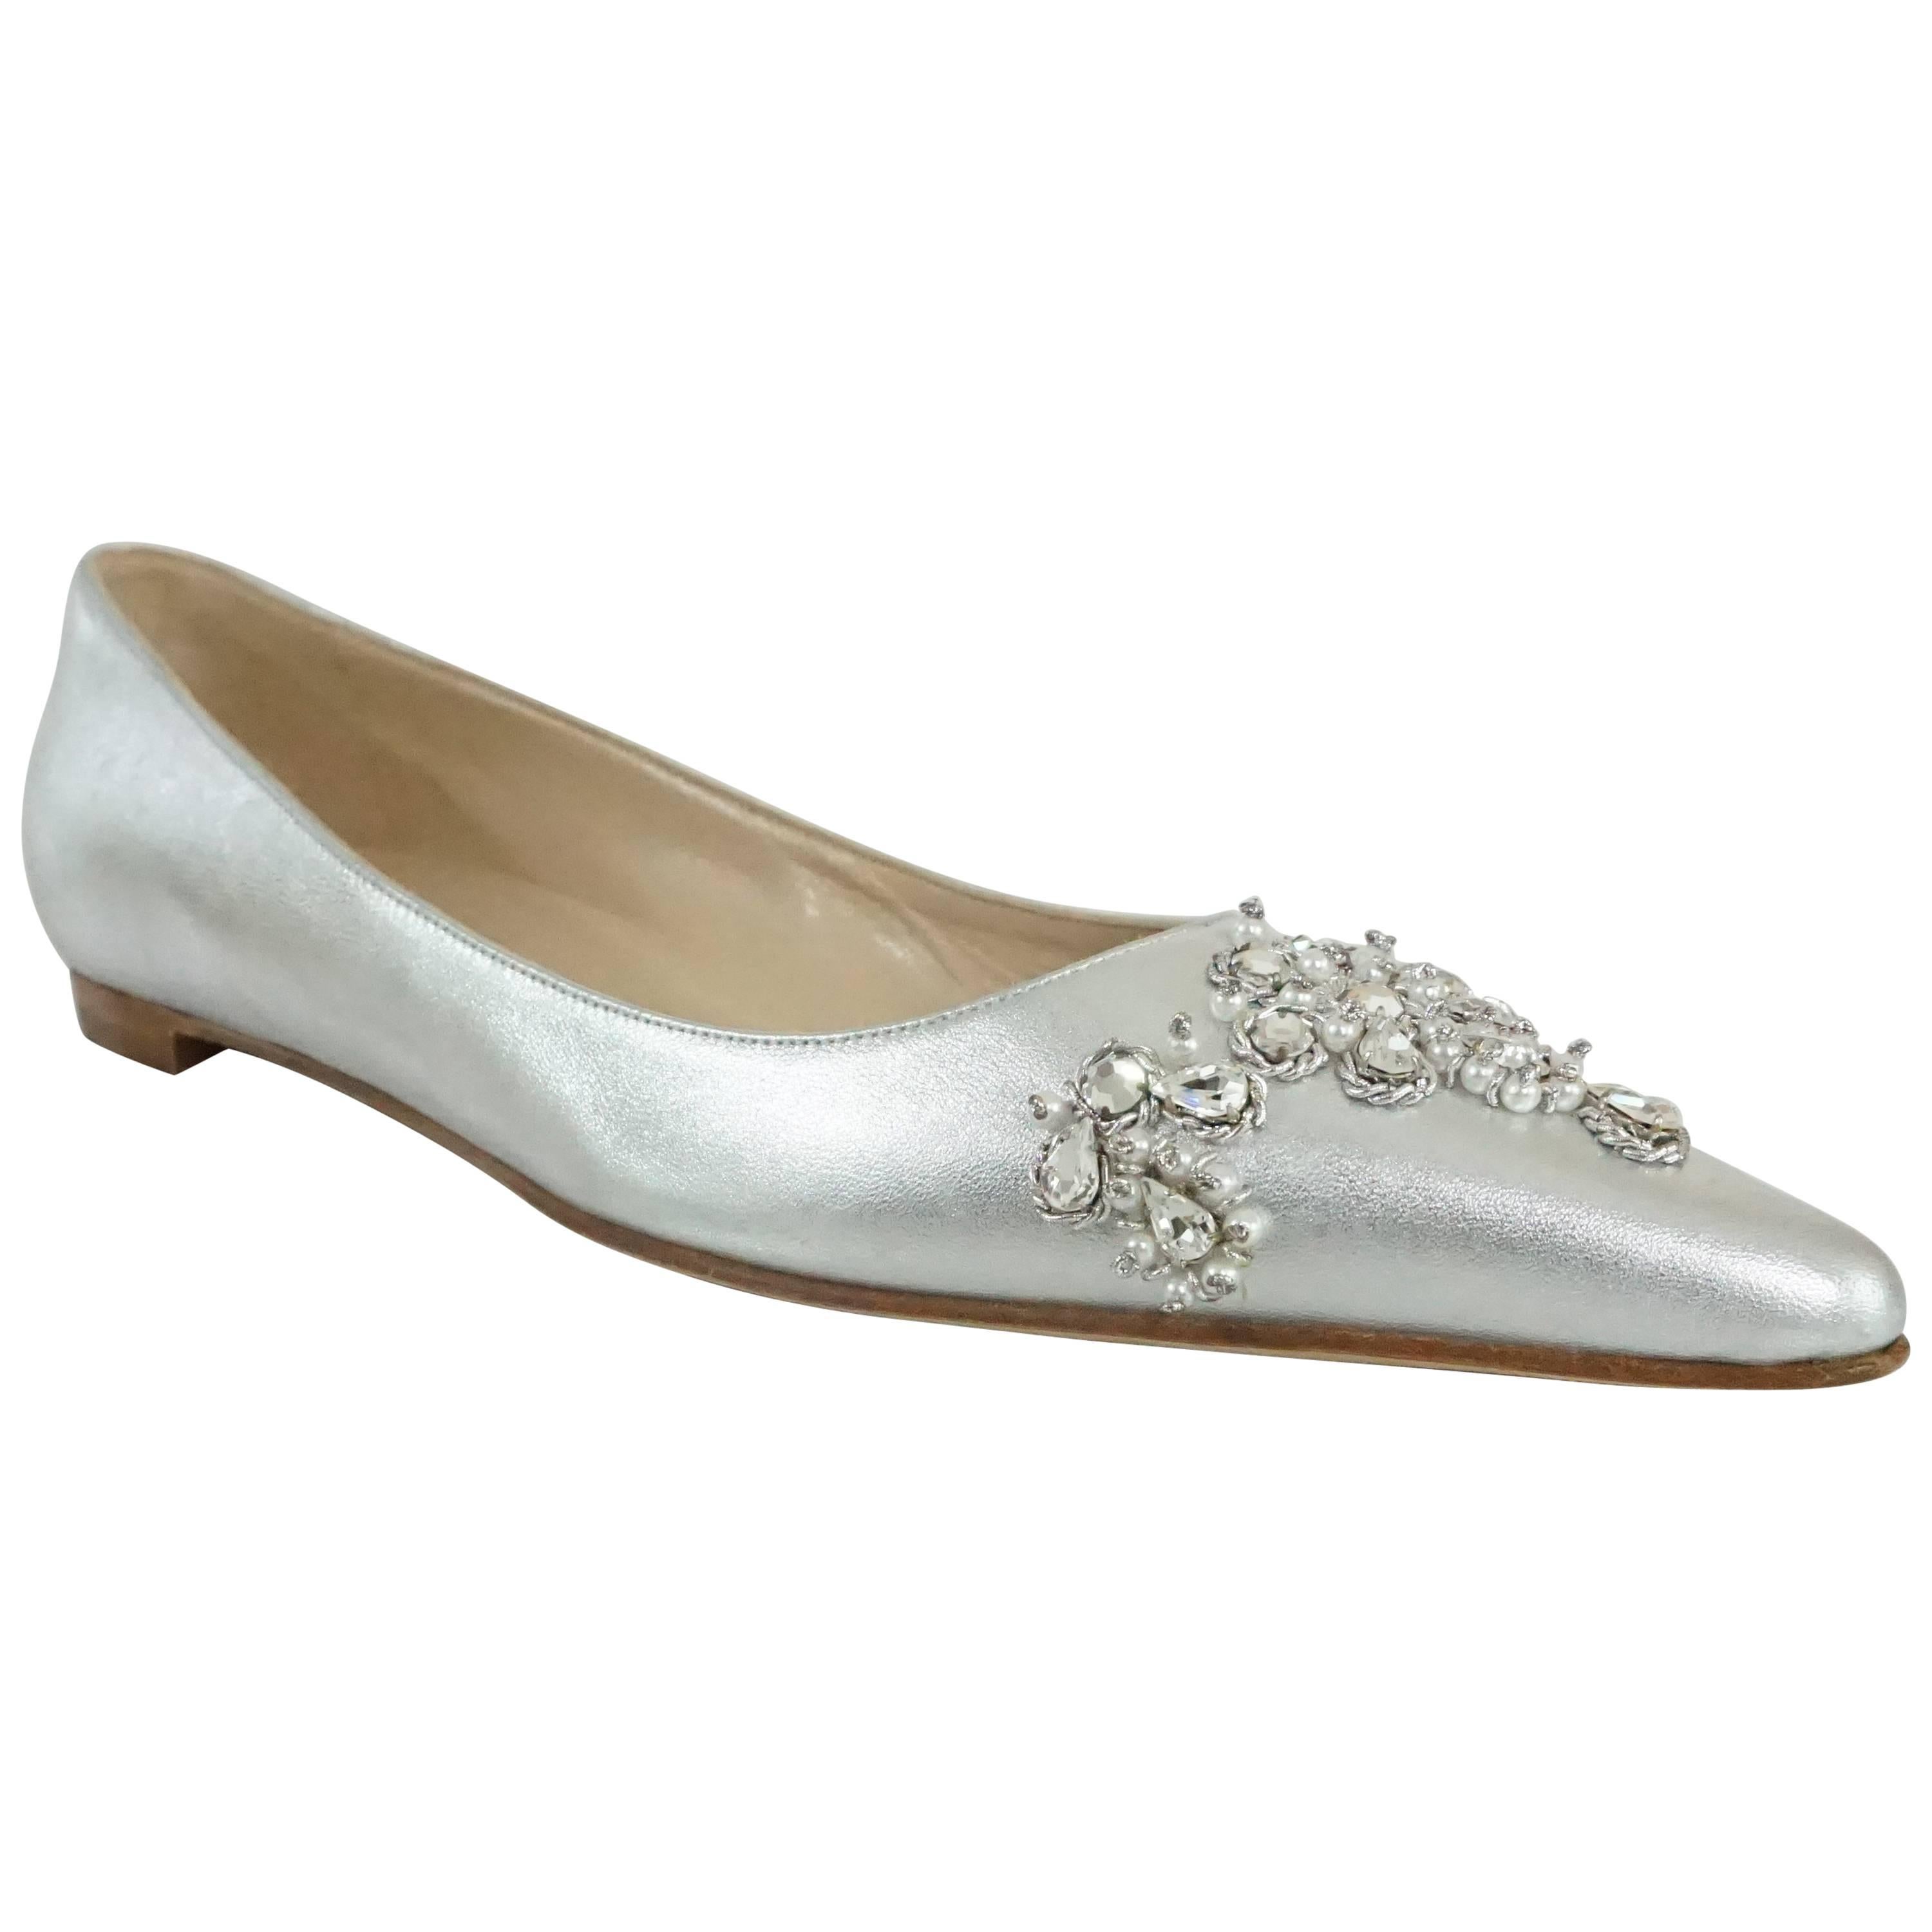 Manolo Blahnik Silver Leather Flats with Rhinestone and Pearl Detail - 40